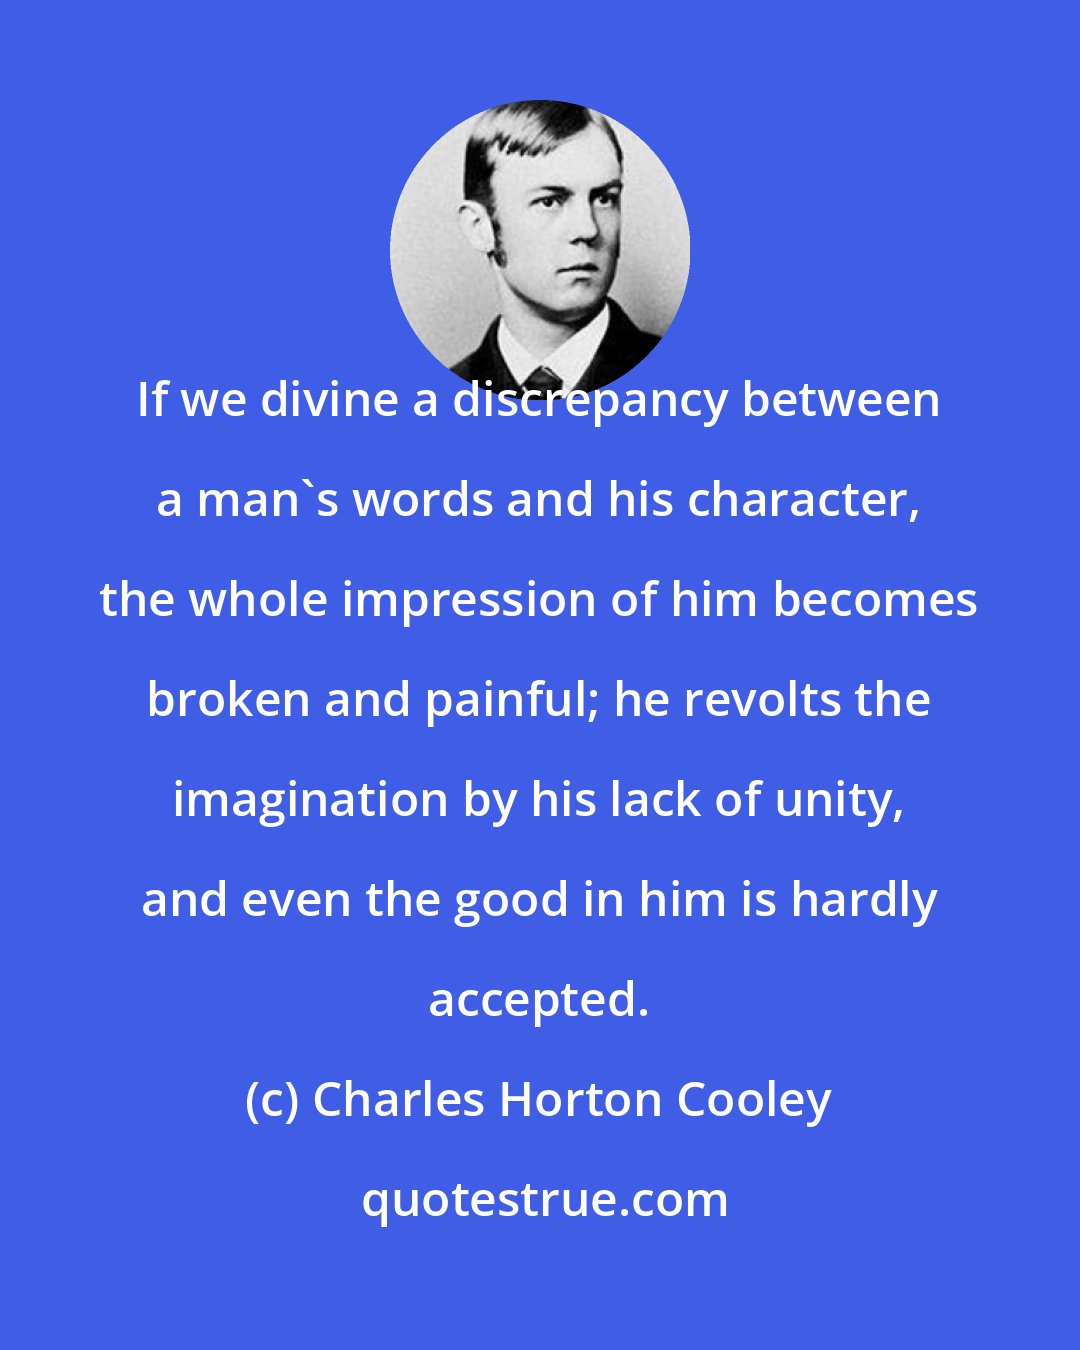 Charles Horton Cooley: If we divine a discrepancy between a man's words and his character, the whole impression of him becomes broken and painful; he revolts the imagination by his lack of unity, and even the good in him is hardly accepted.